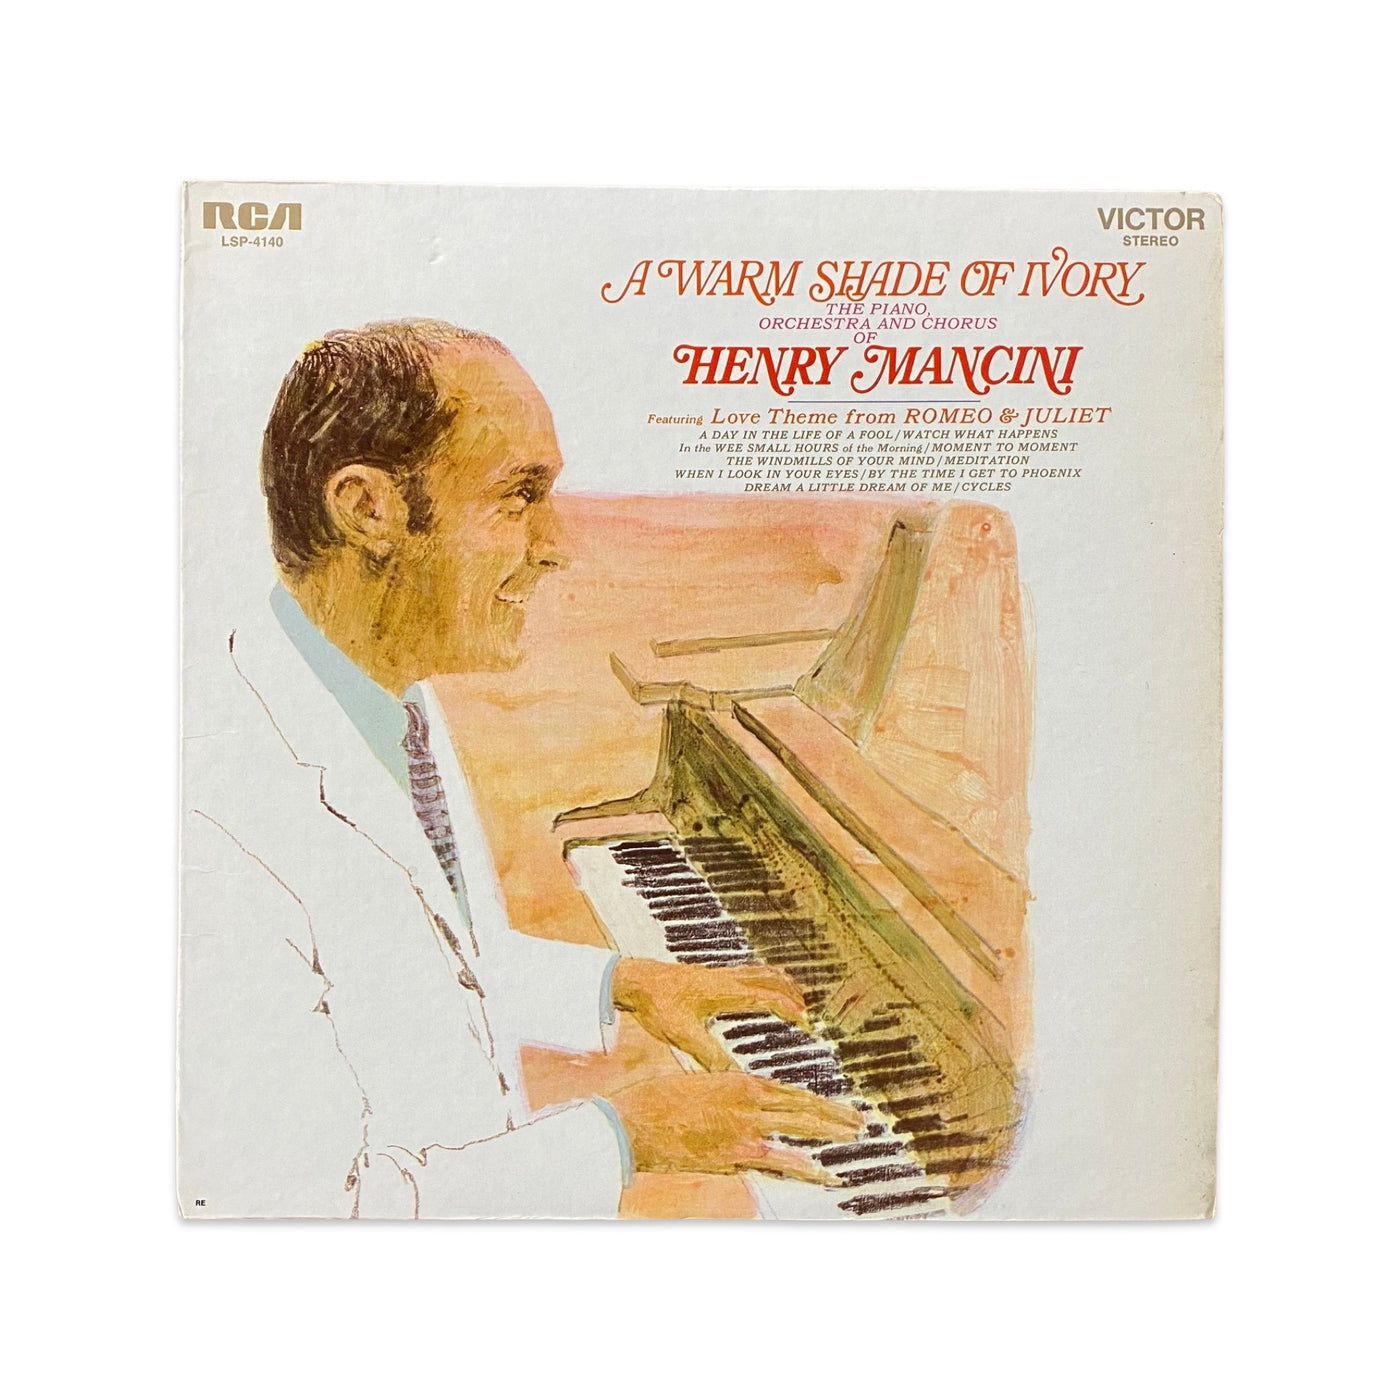 Henry Mancini And His Orchestra And Chorus - A Warm Shade Of Ivory